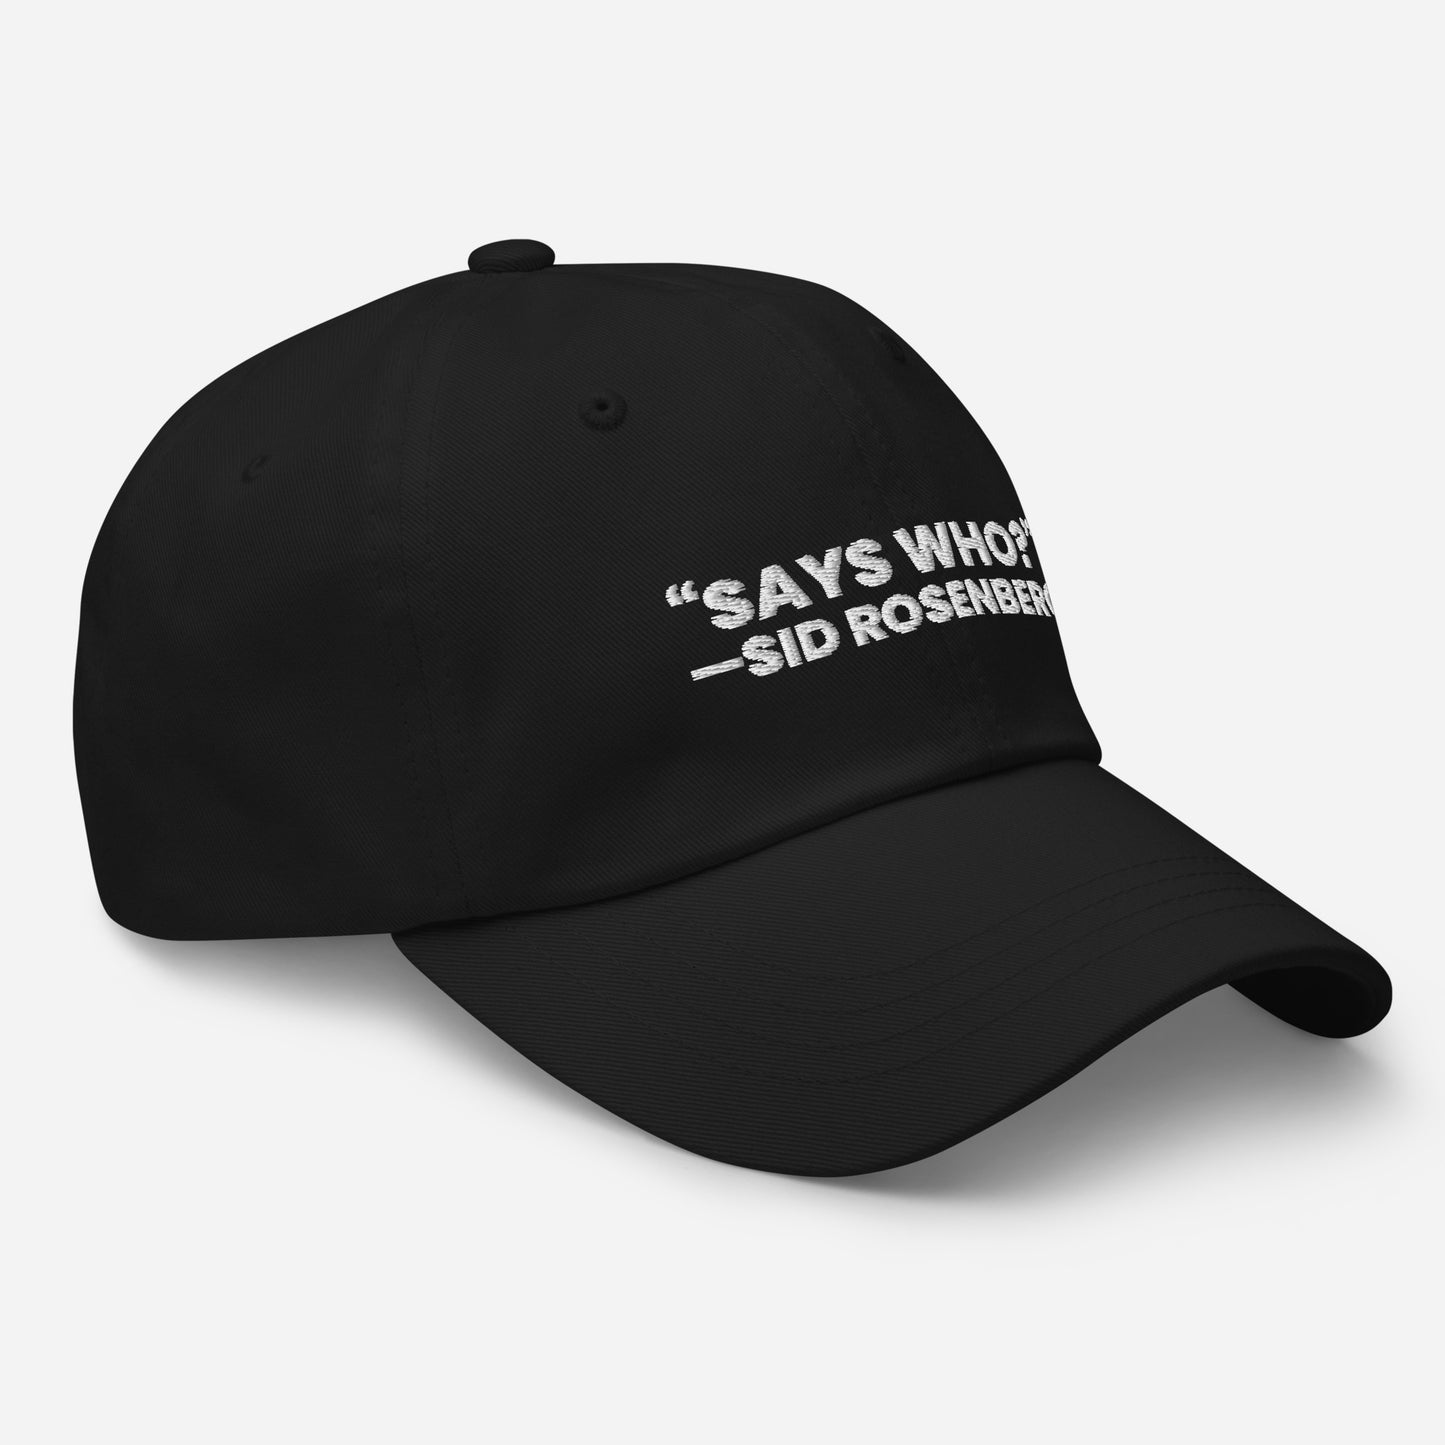 "SAYS WHO?" hat